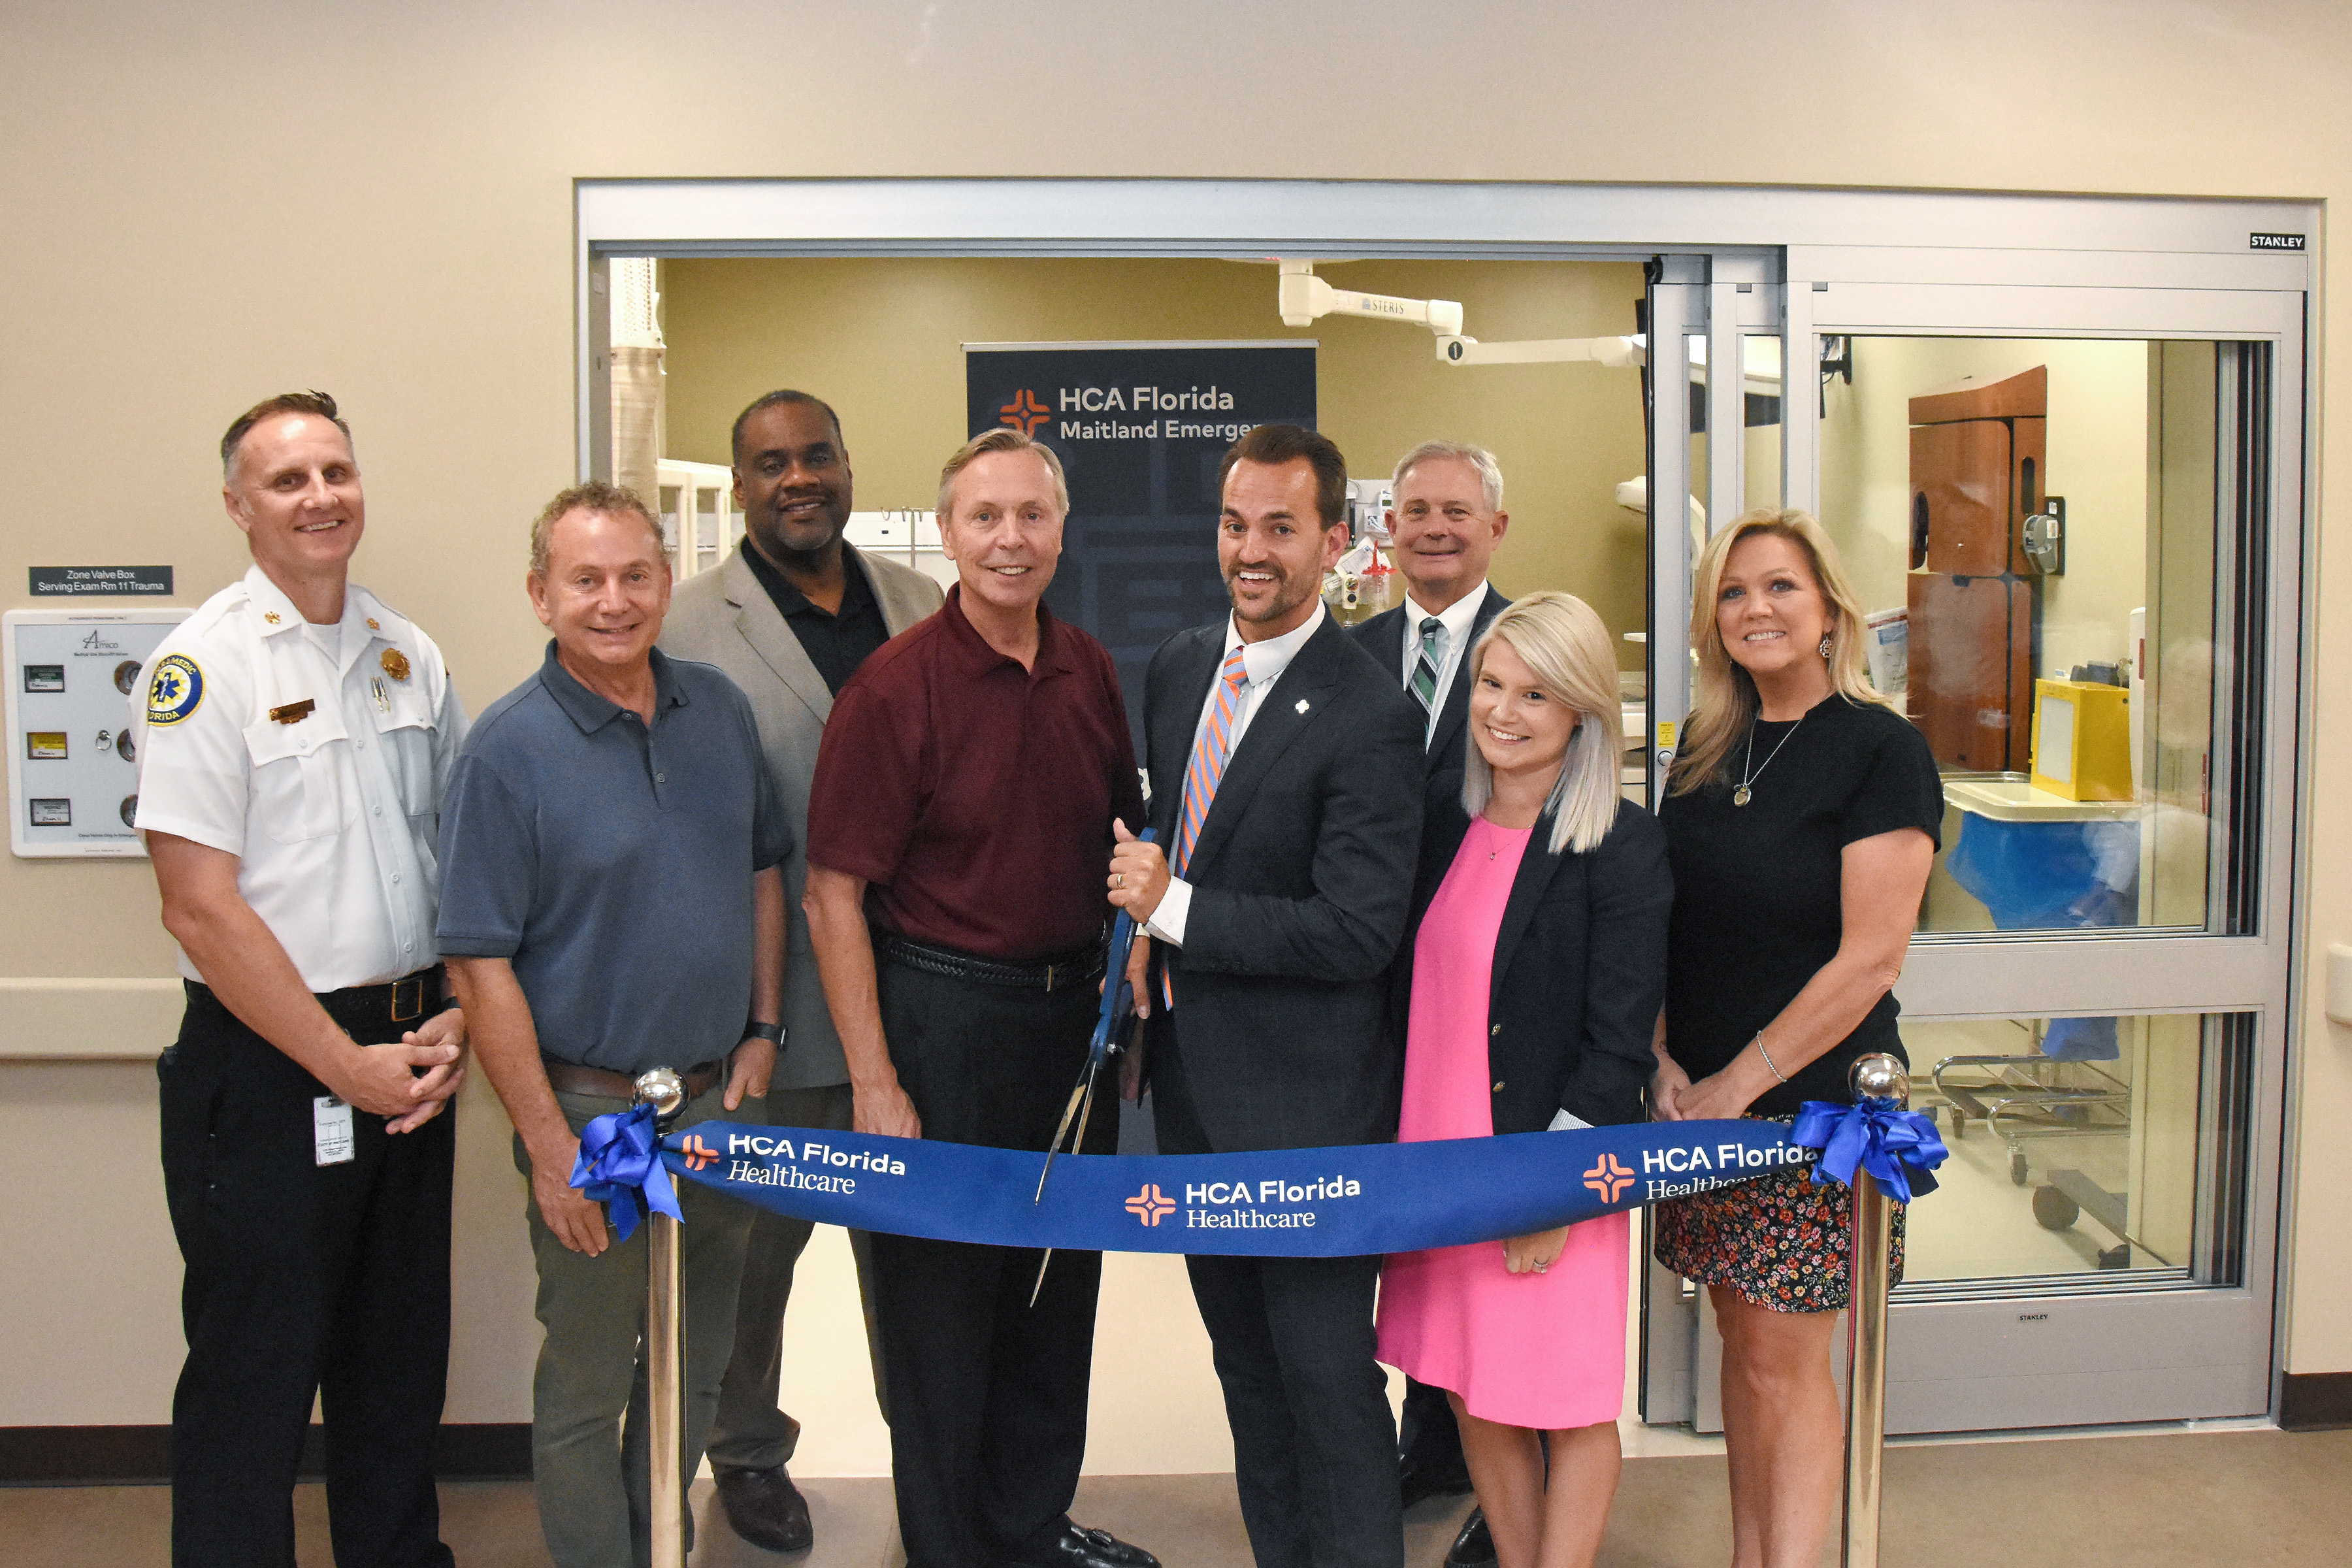 From left to right: Maitland Fire Chief Chris Morton; Mark Wechsler, PA; Board Members Jeffrey B. Campbell and Rep. David Smith; Chief Nursing Officer Joseph Everette; Chief Medical Officer Bob Shaver, MD; ER Director Taylor Dark and ER Manager Susan Miller cut the ceremonial ribbon marking the opening of the HCA Florida Maitland Emergency.